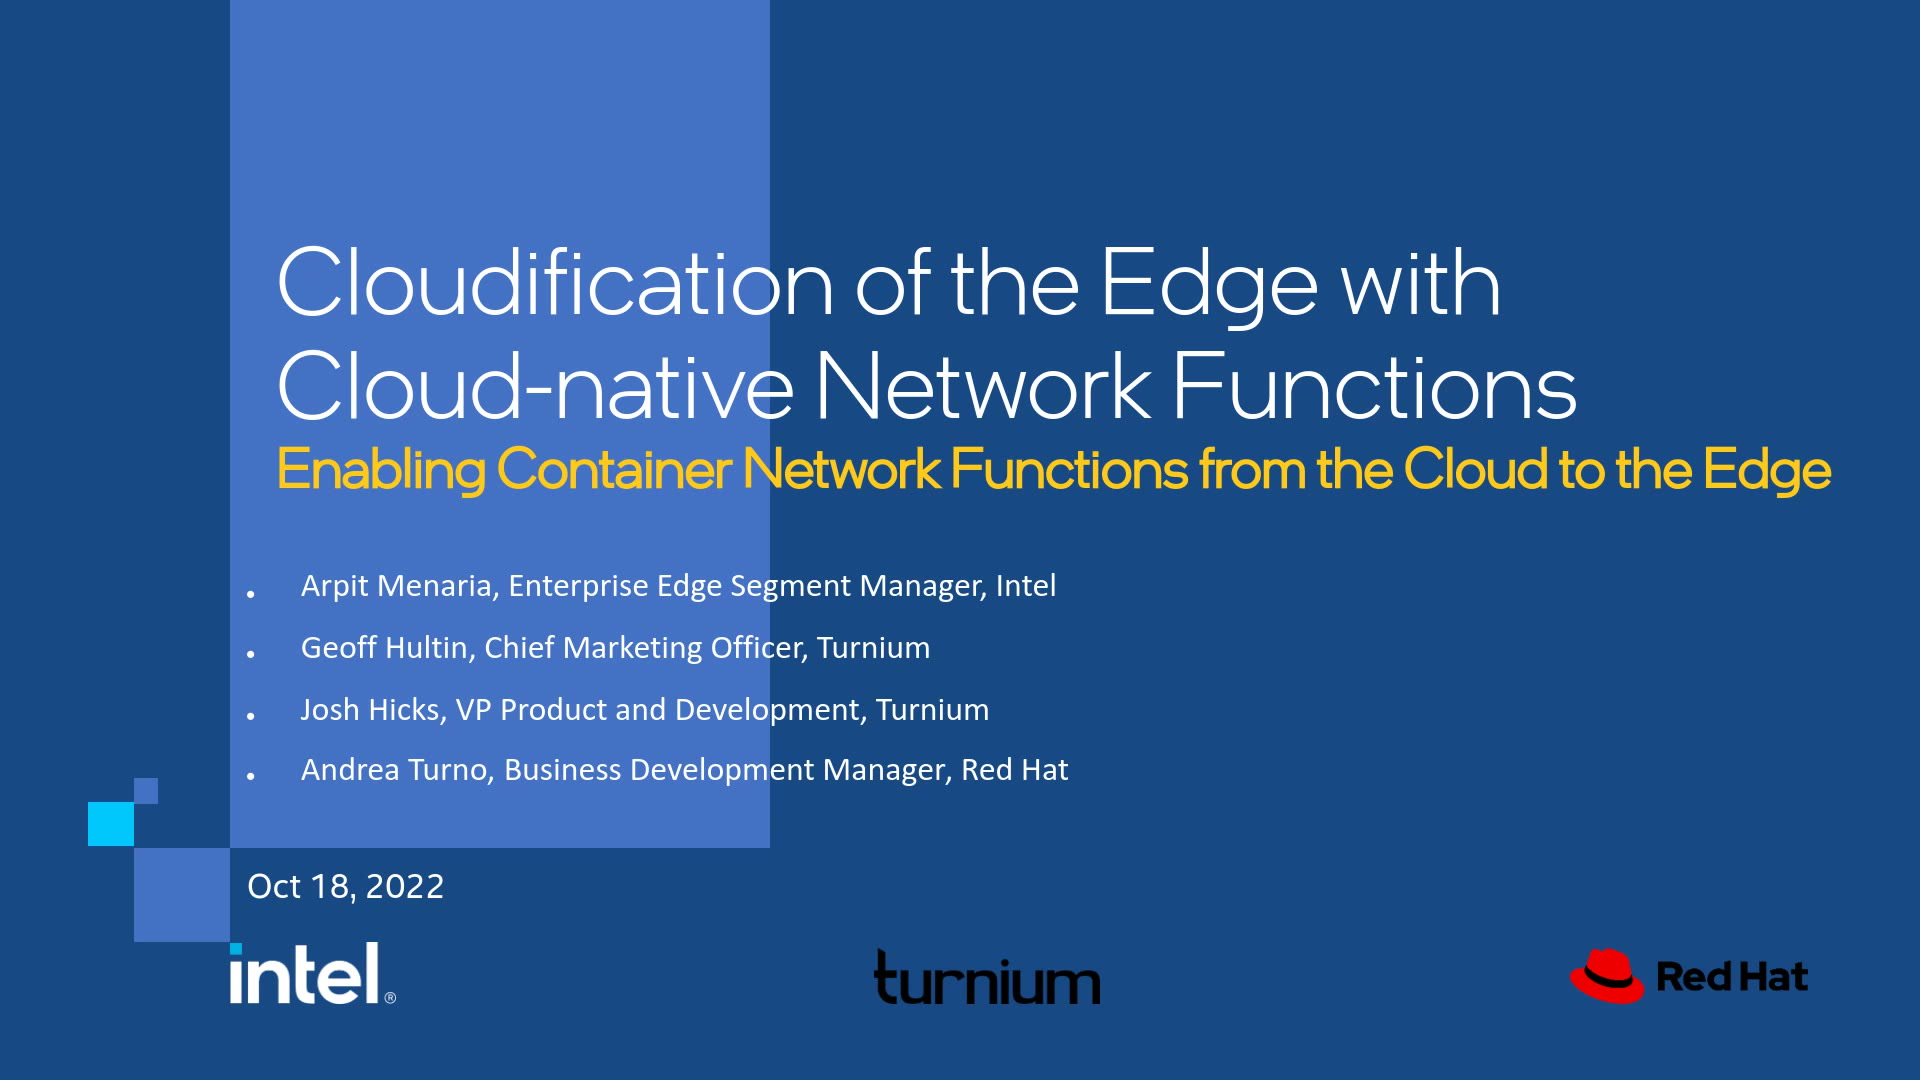 Cloudification of the Edge with Cloud-native Network Functions